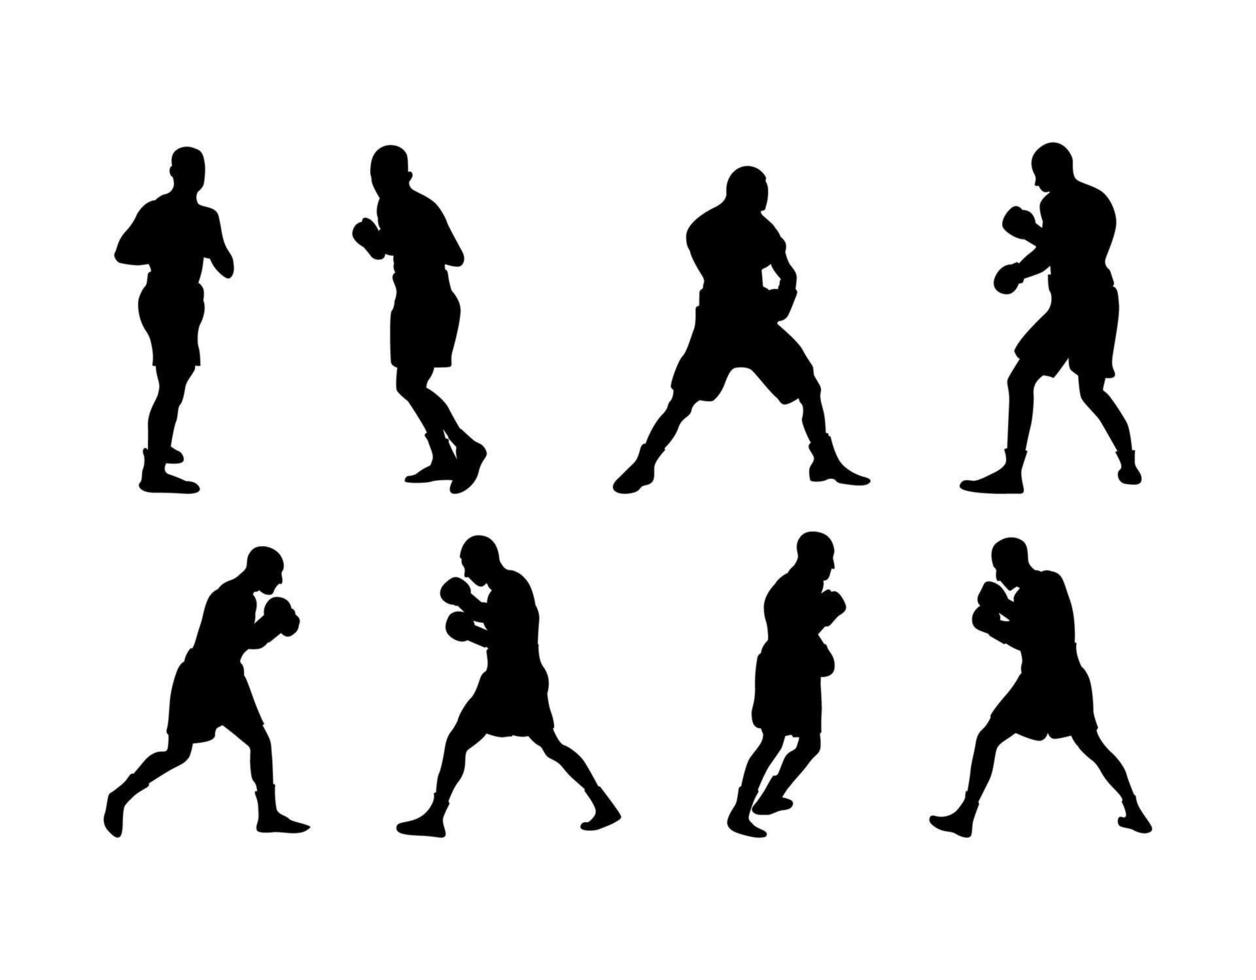 Boxers Silhouettes Set vector